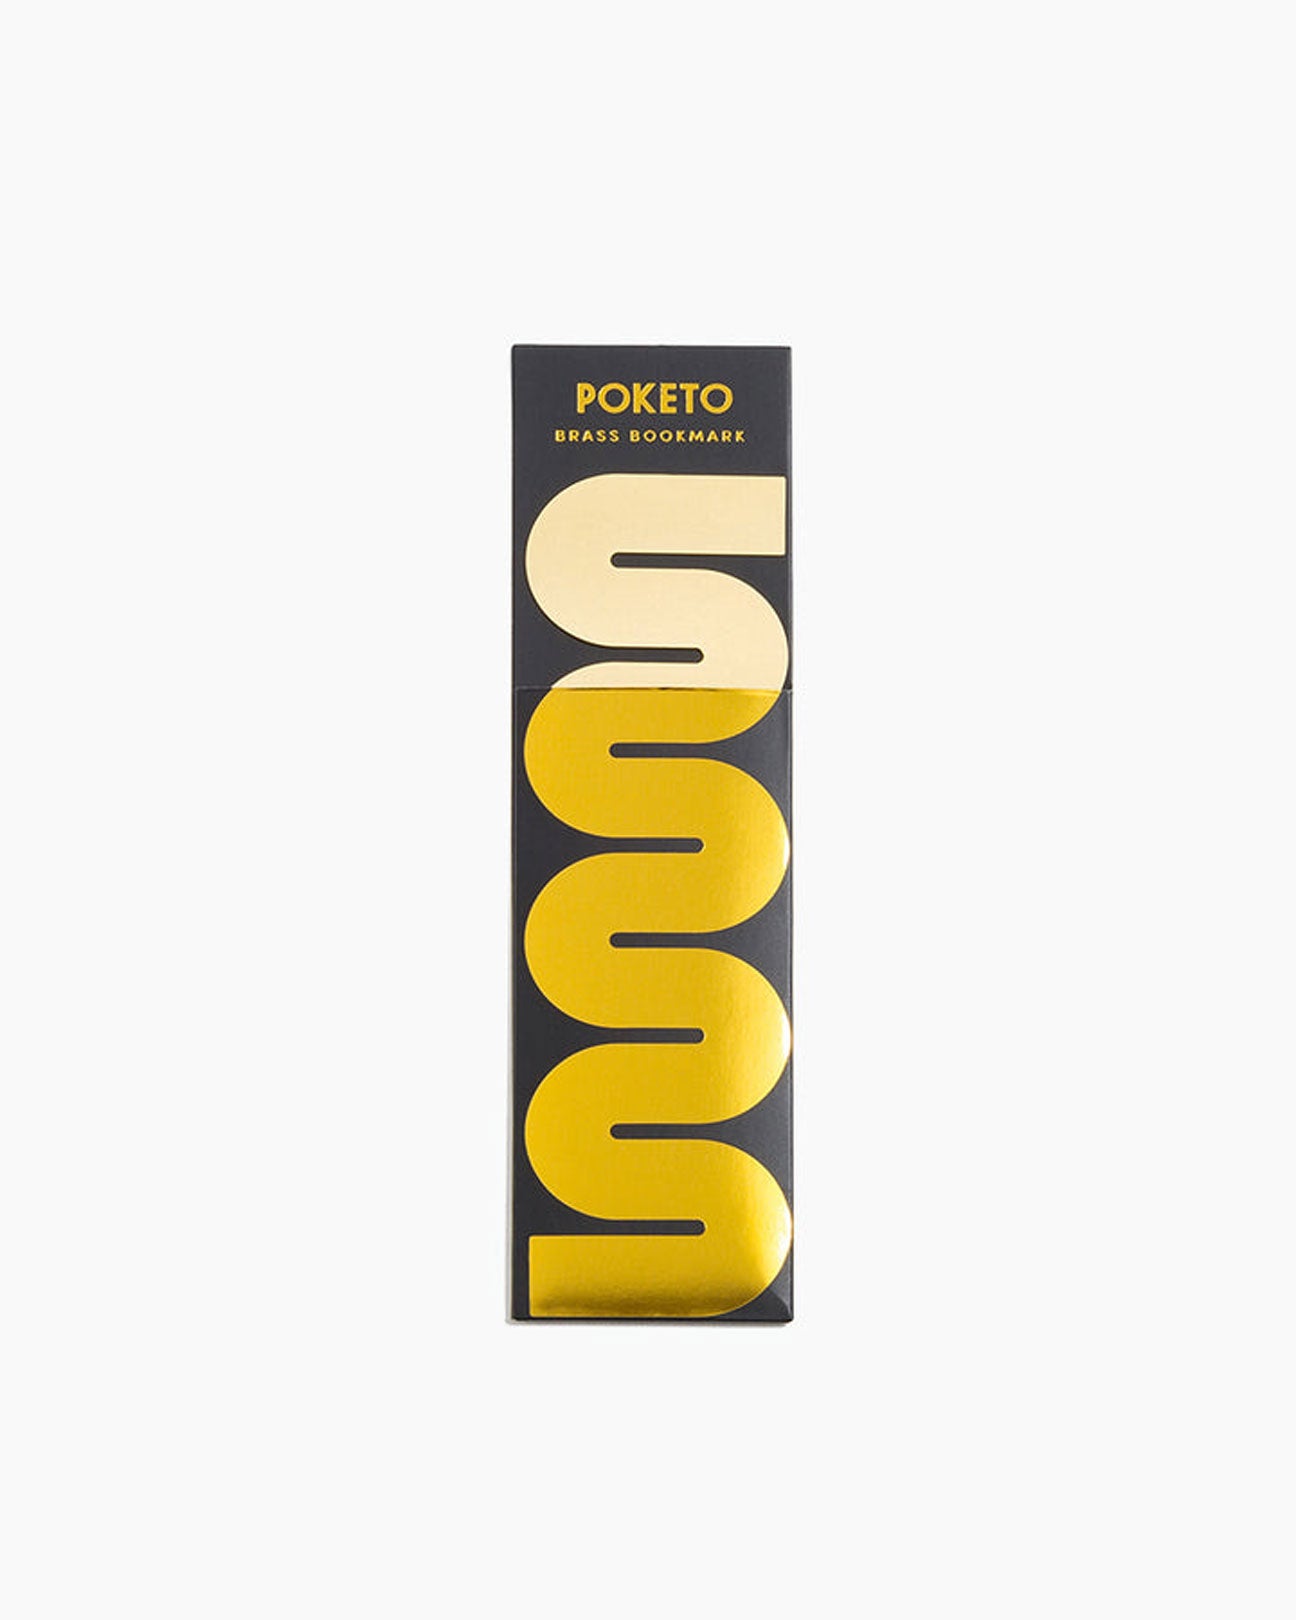 POKETO Brass Bookmark in Wave available at Lahn.shop